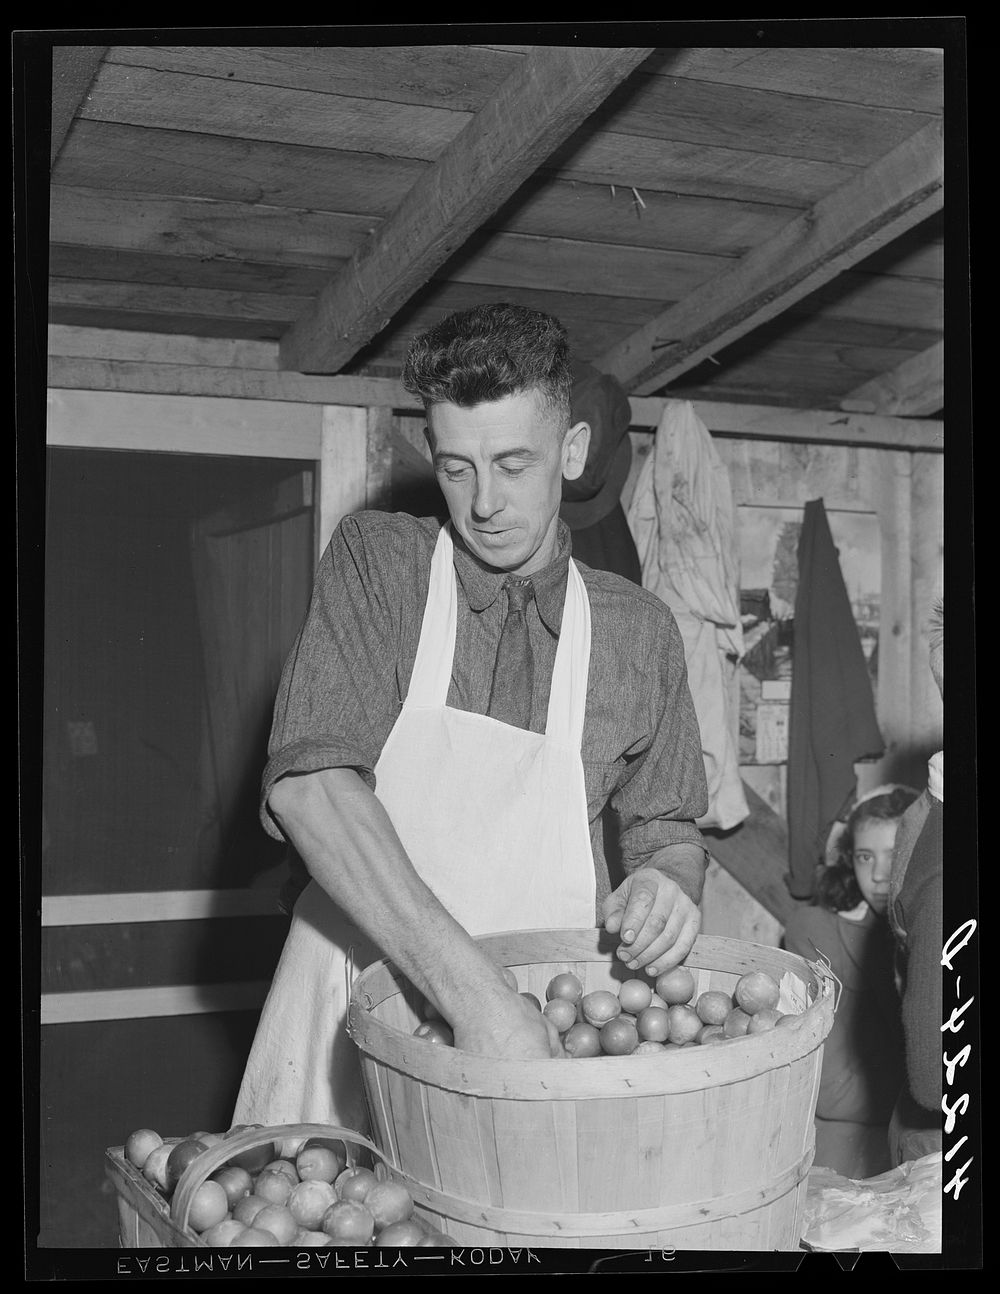 Mr. Cooper, member of board of directors of the Tri-County Farmers Co-op Market at Du Bois, Pennsylvania. Sourced from the…